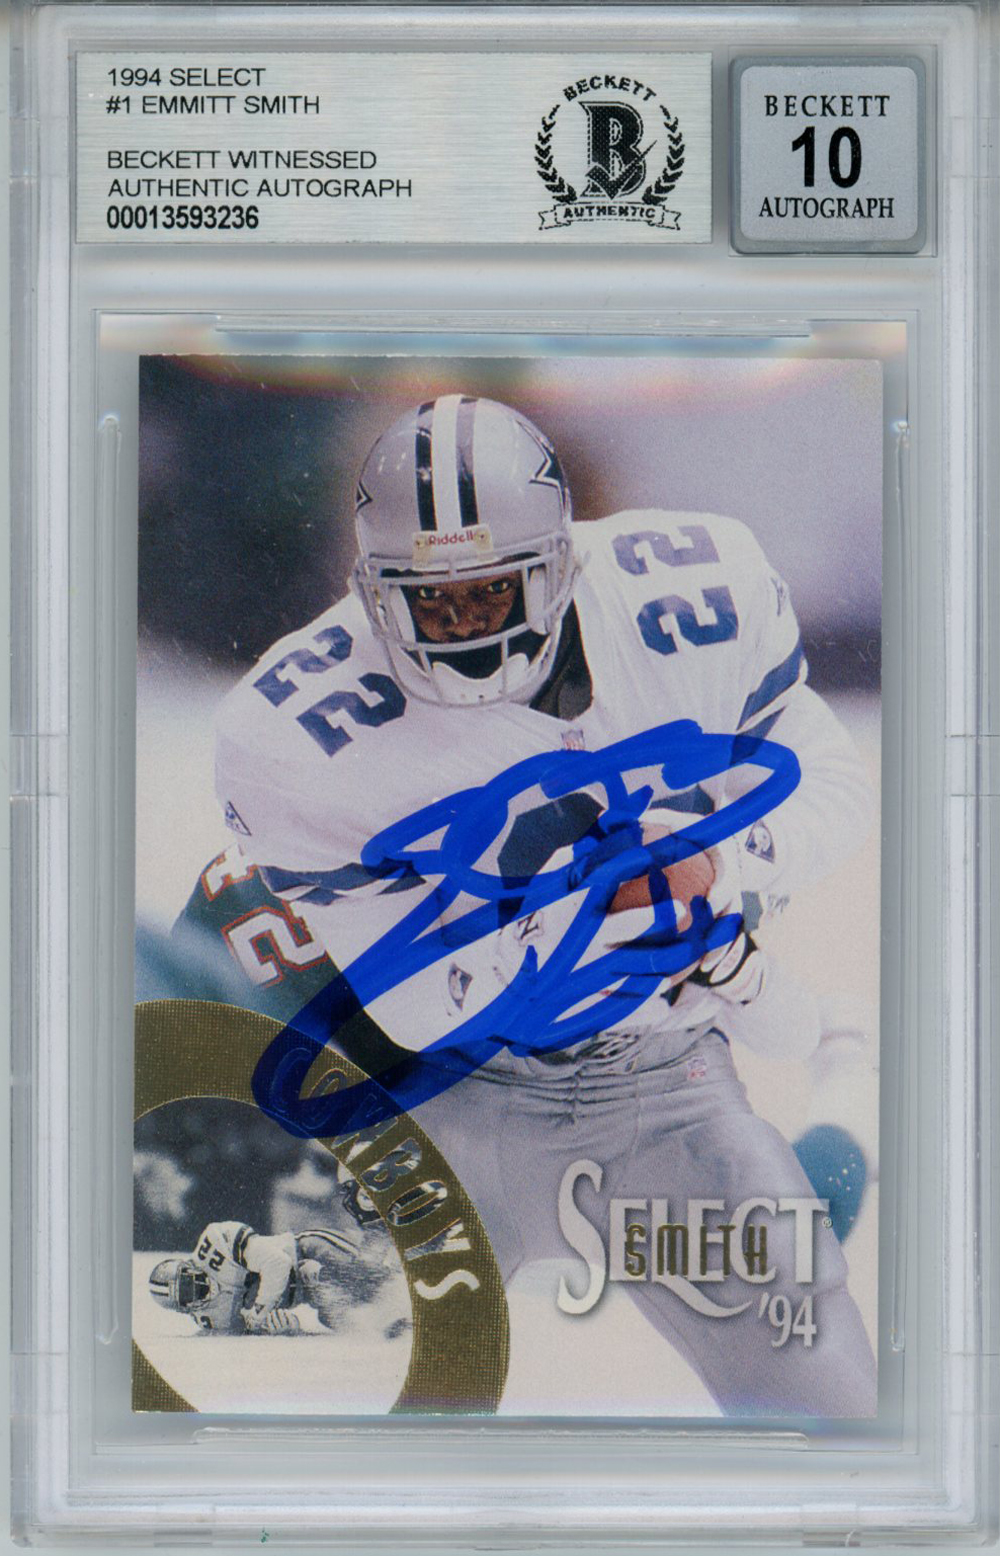 Emmitt Smith Autographed 1994 Select #1 Trading Card Beckett 10 Slab